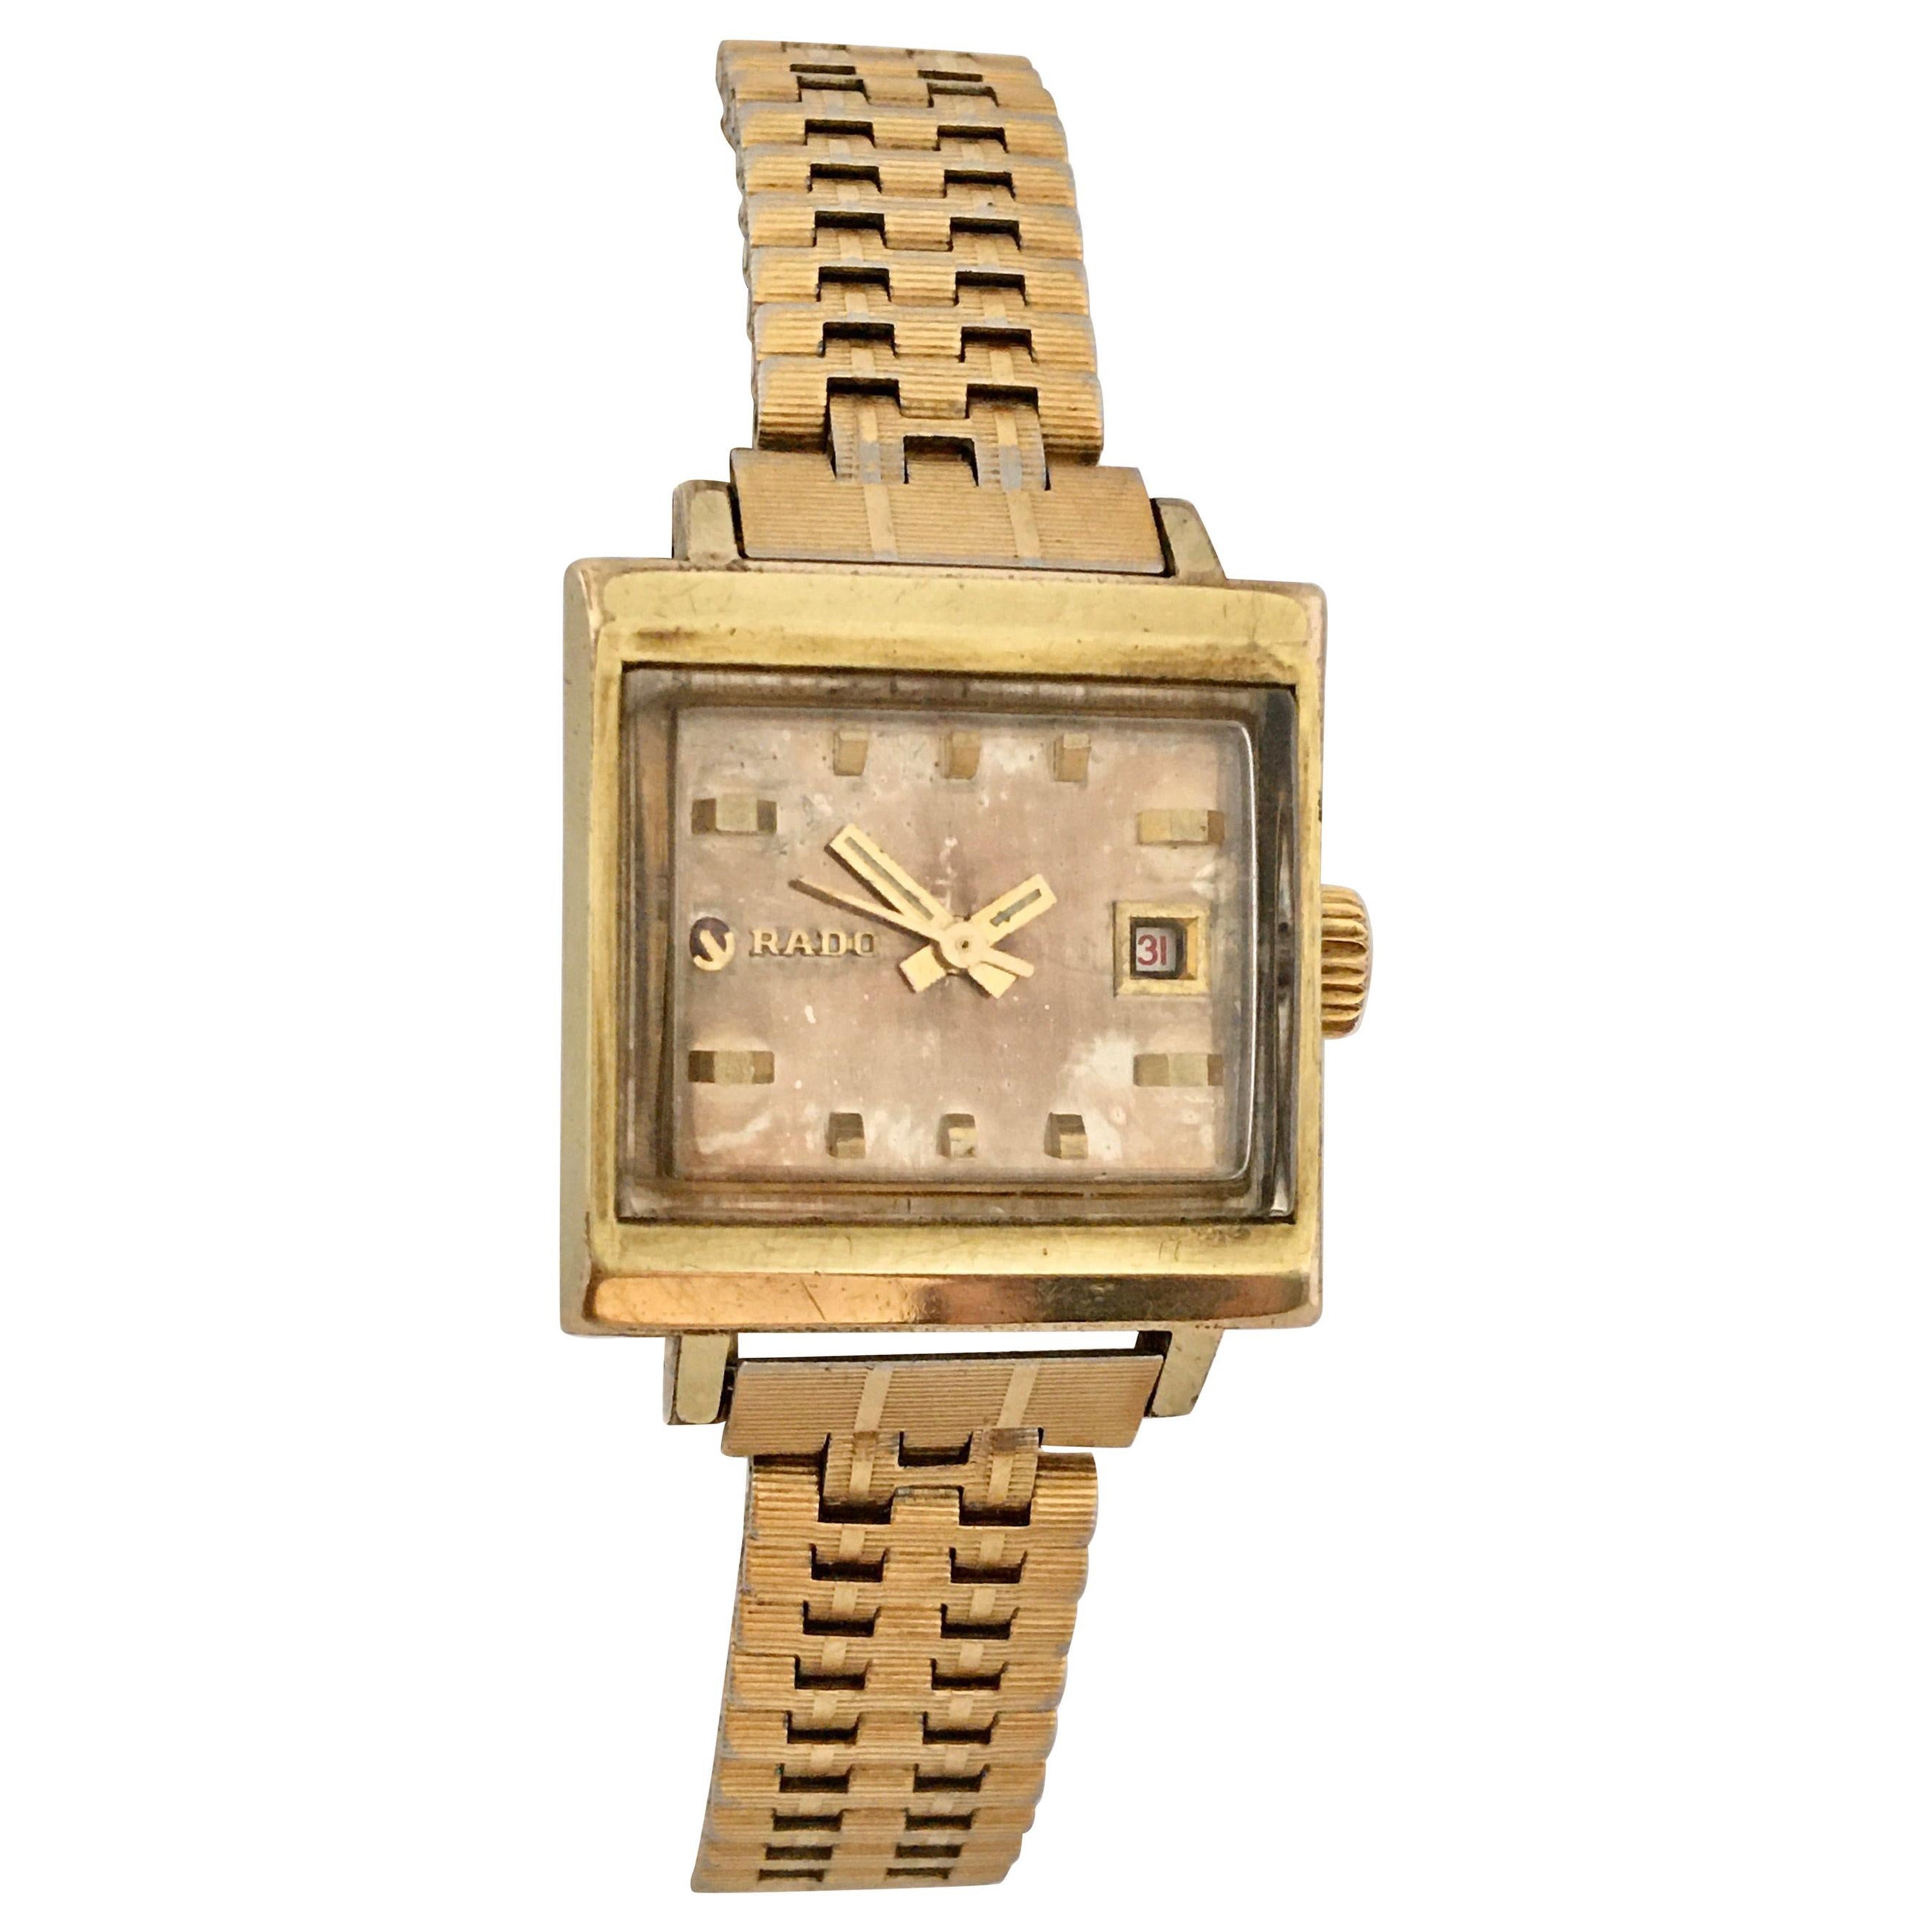 Vintage 1970s Gold-Plated / Stainless Steel Rado Automatic Watch For Sale